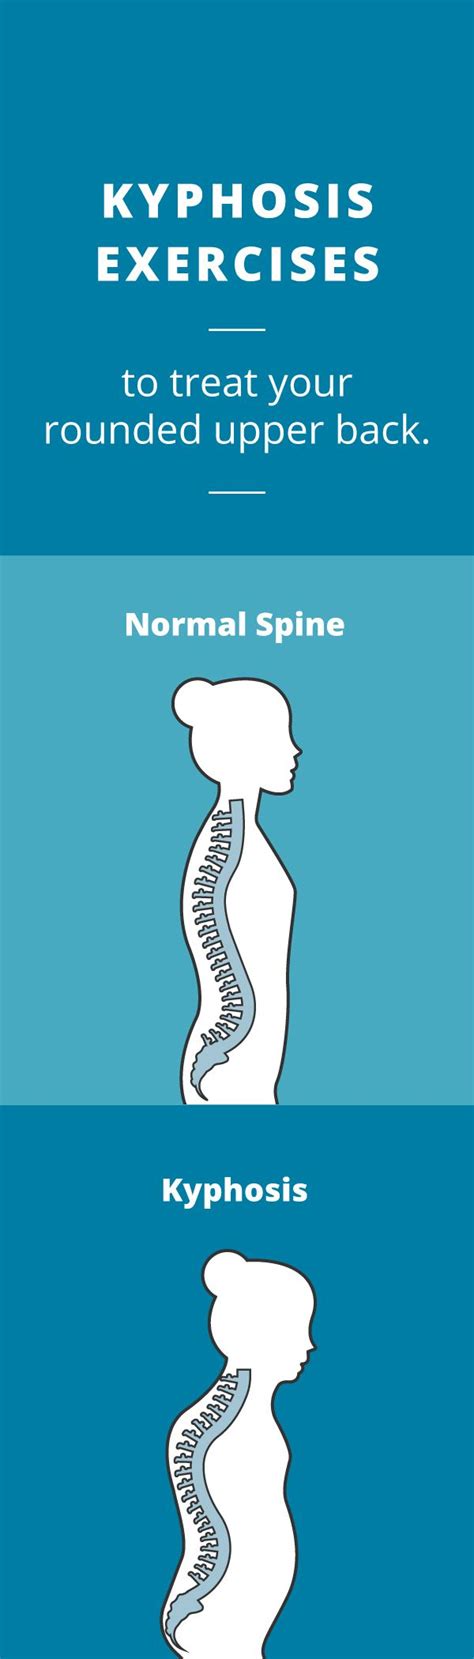 Kyphosis Exercises Treat A Rounded Upper Back With Images Kyphosis